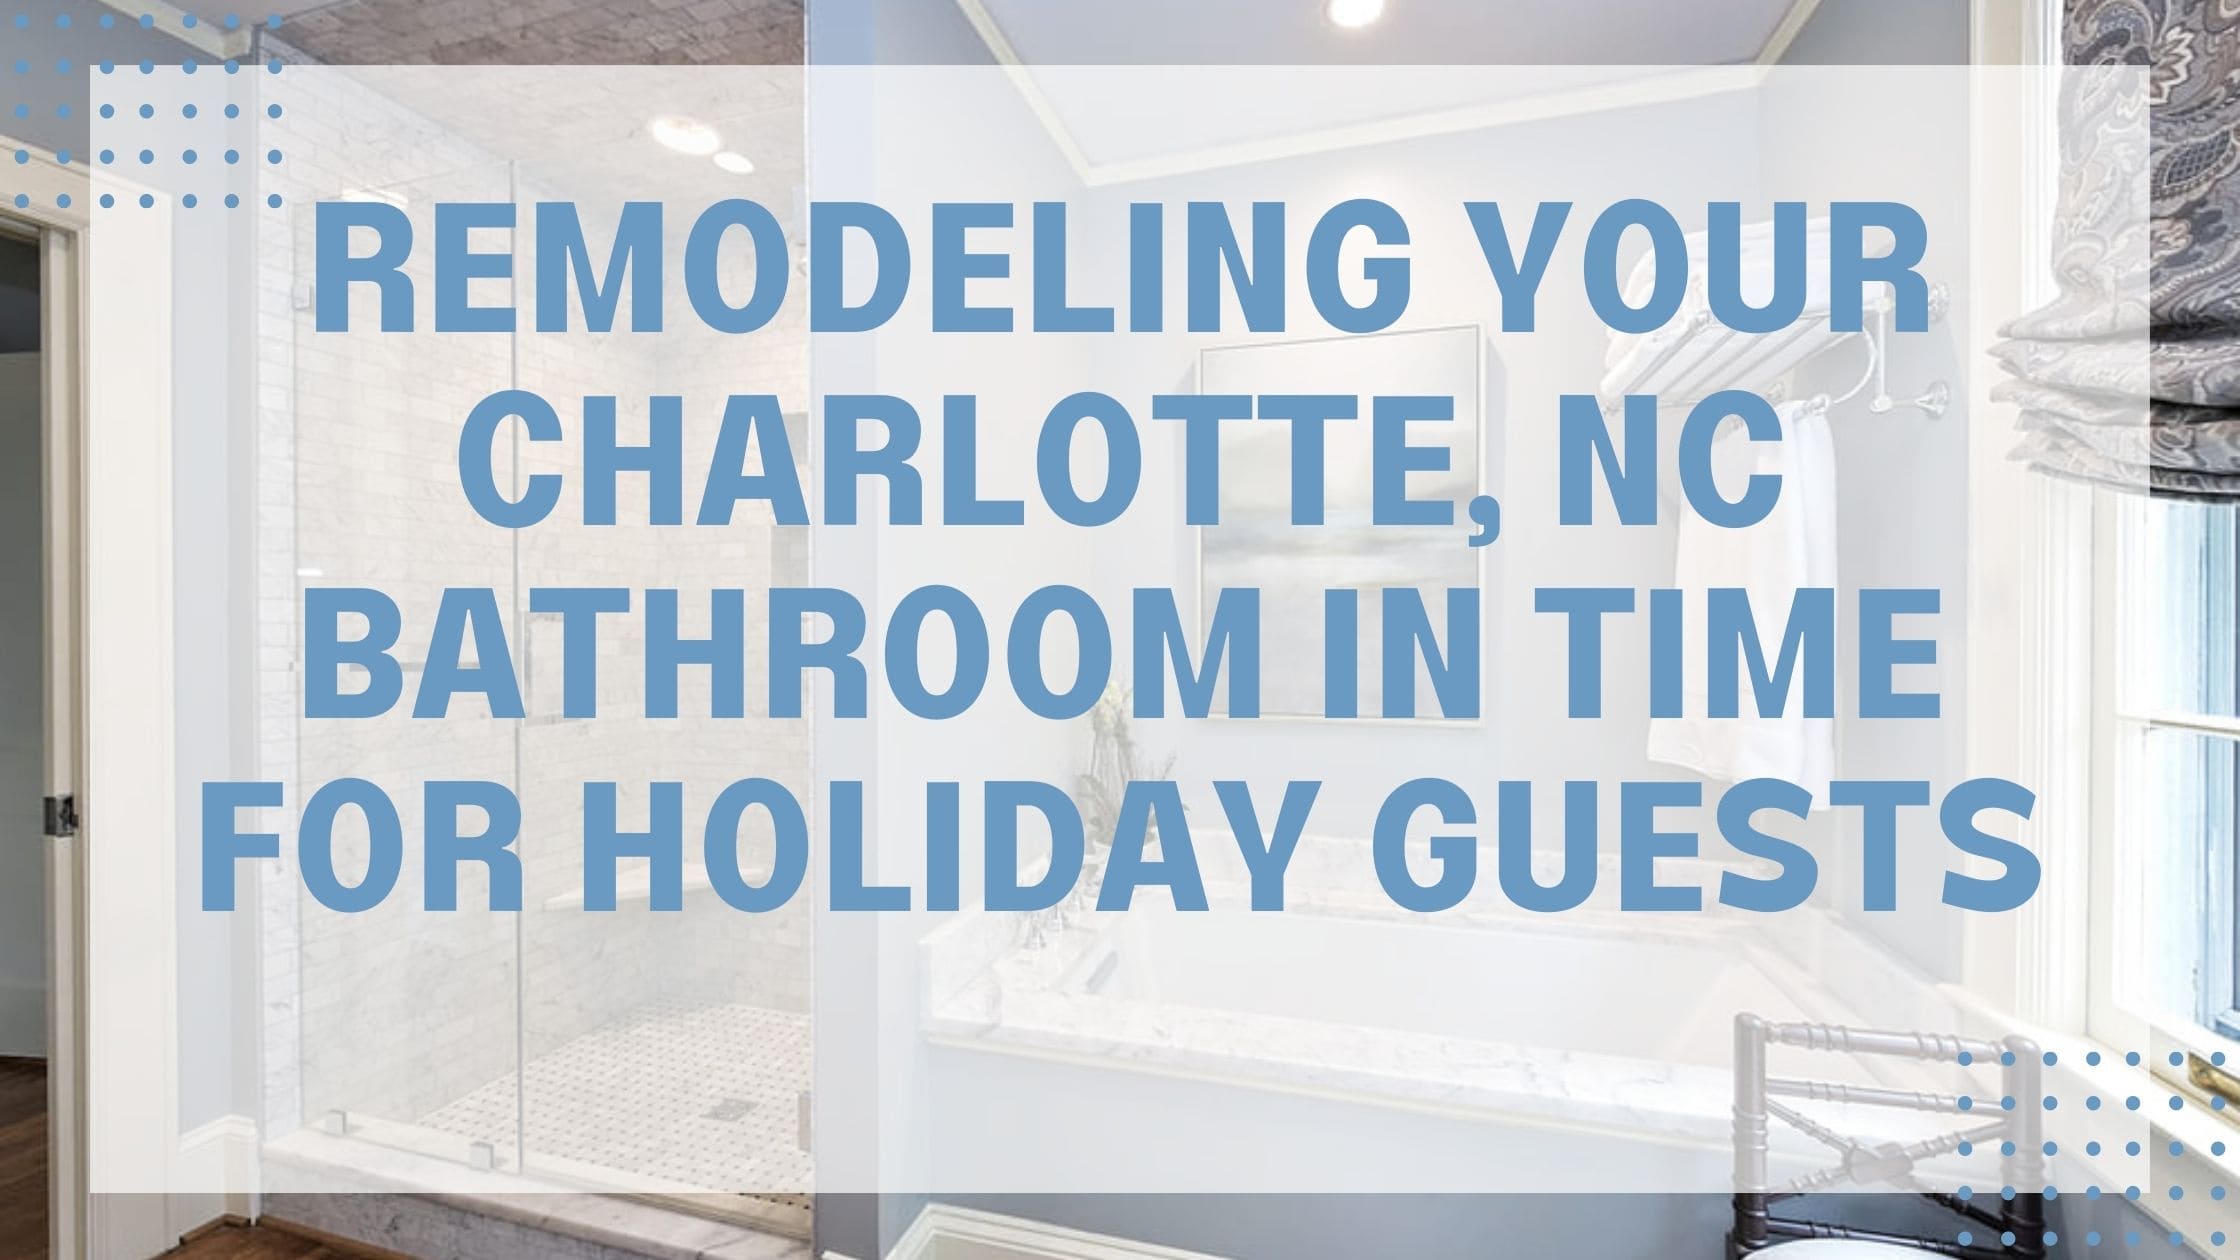 Remodeling Your Charlotte, NC Bathroom In Time For Holiday Guests